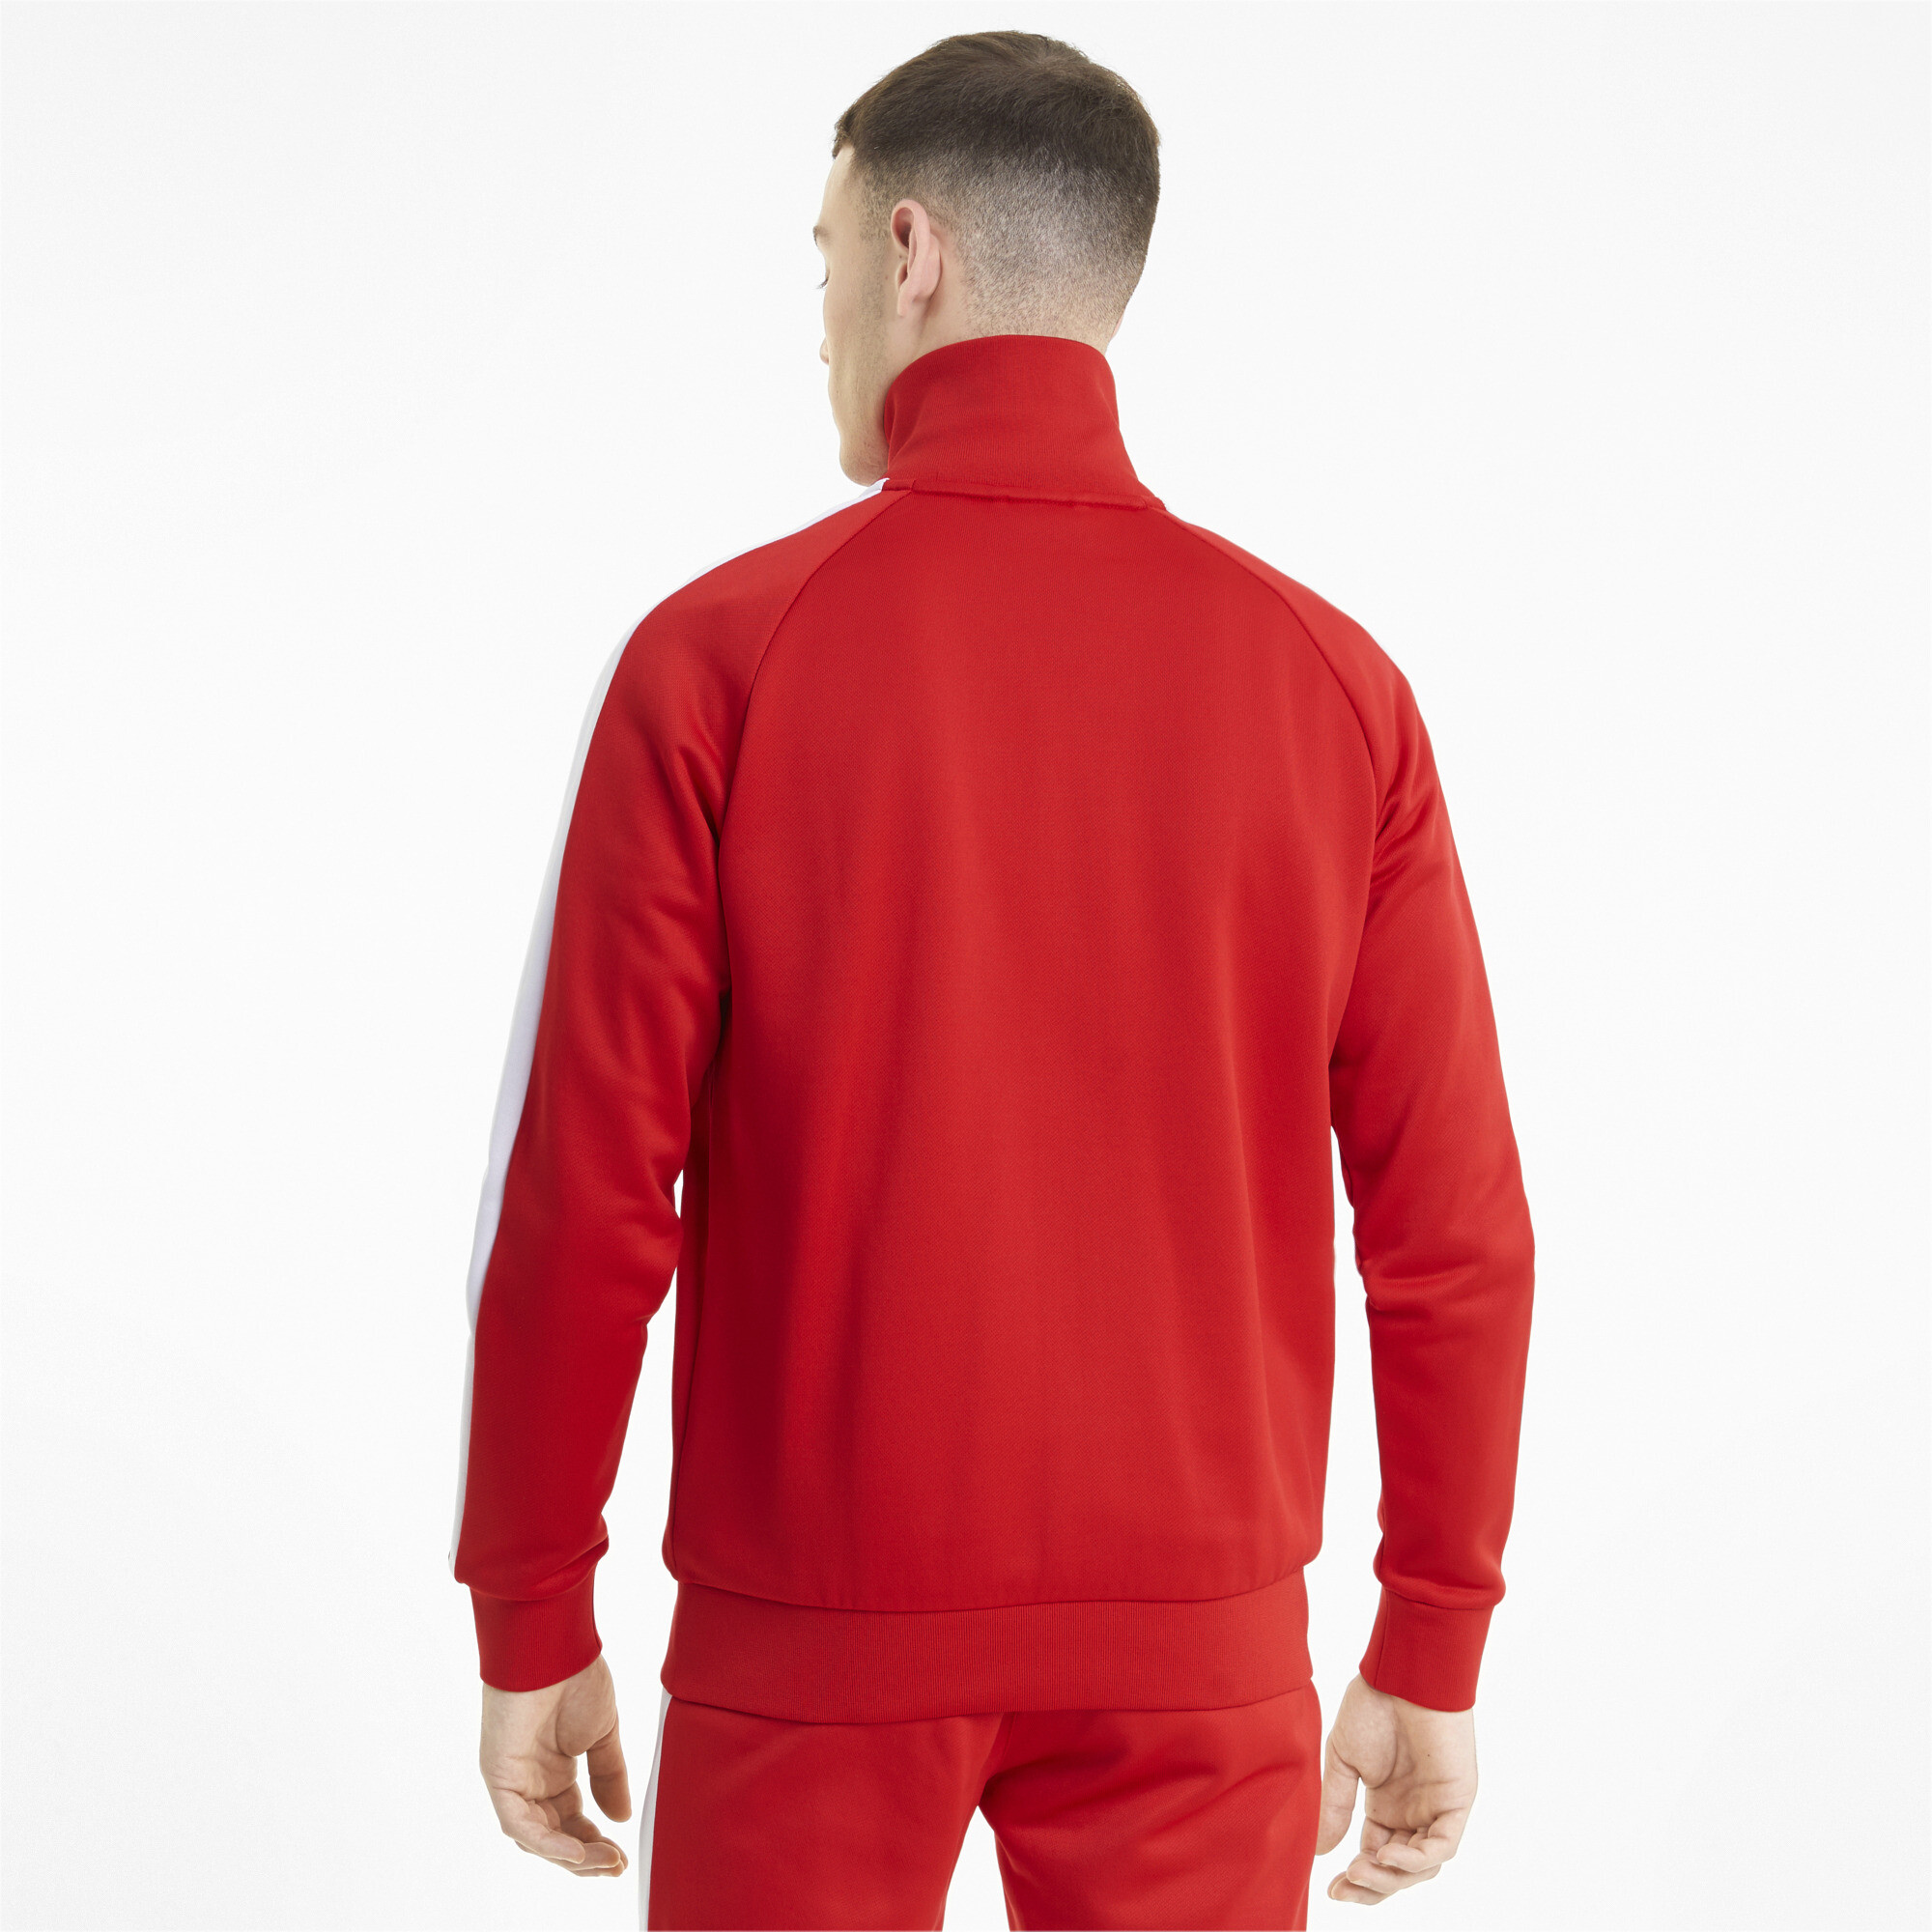 Men's PUMA Iconic T7 Track Jacket In Red, Size 2XL